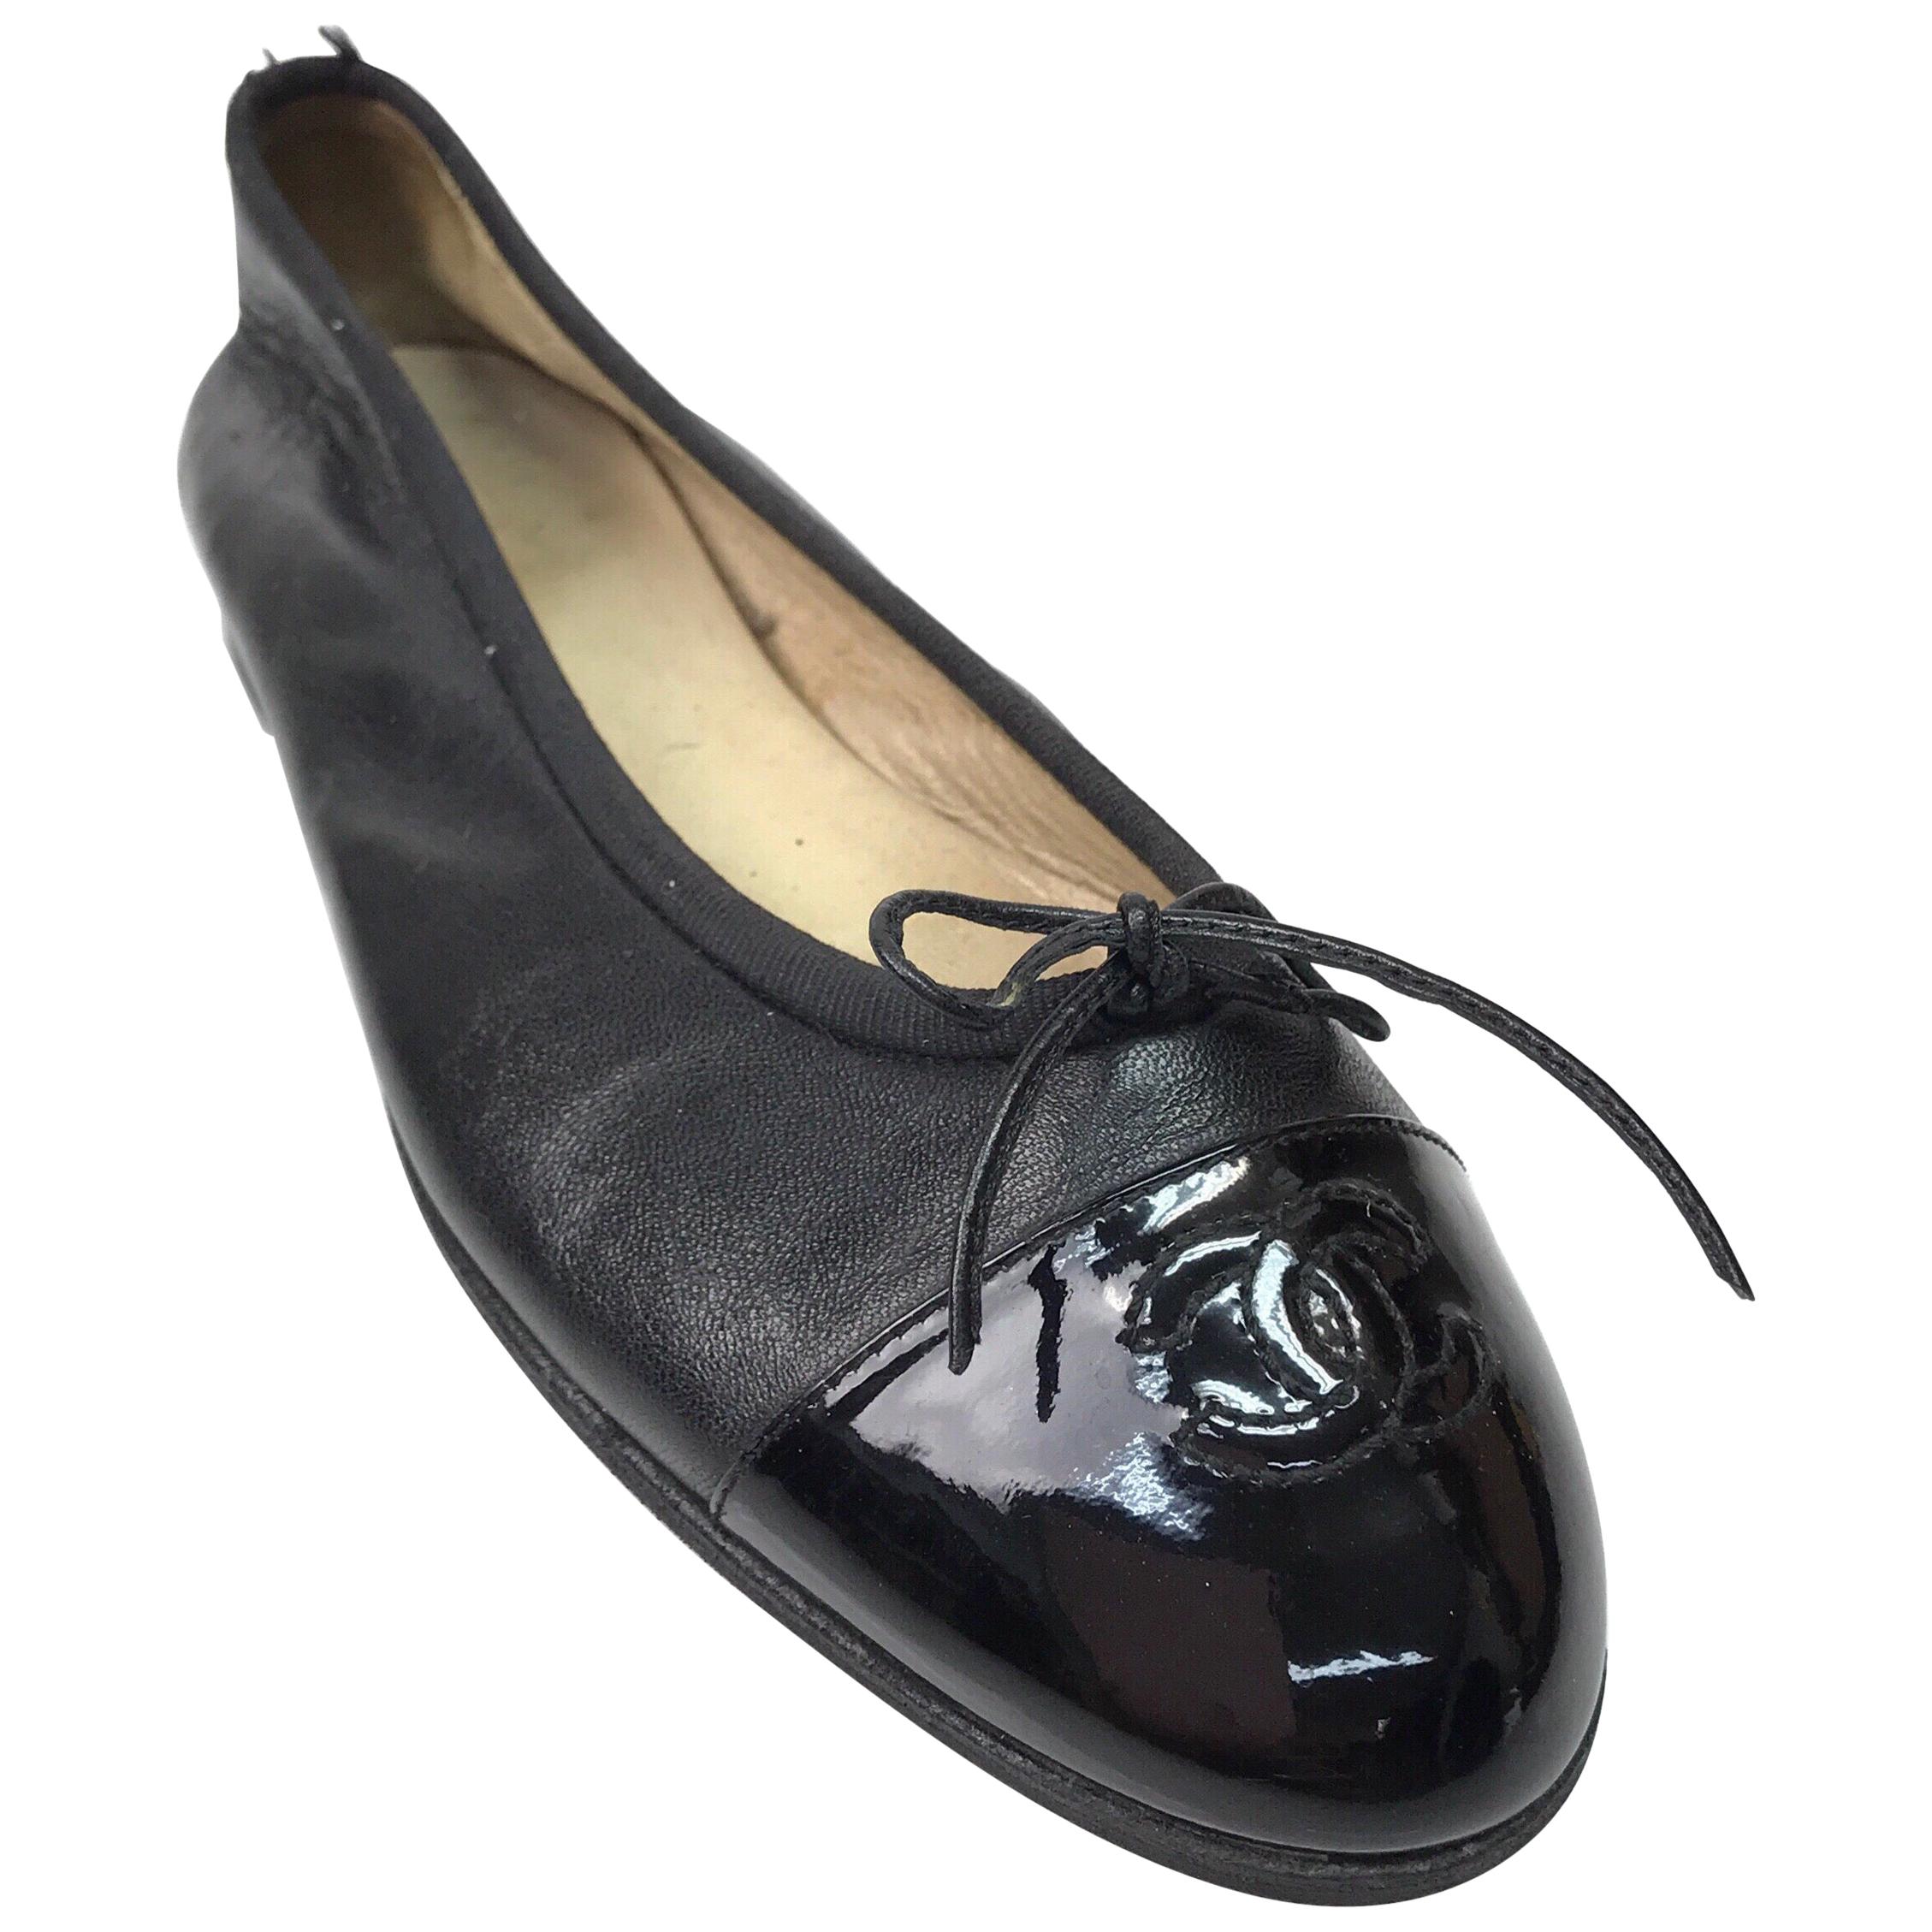 Chanel Black Leather Ballet Flats w/ Patent Toe & Bow-38.5